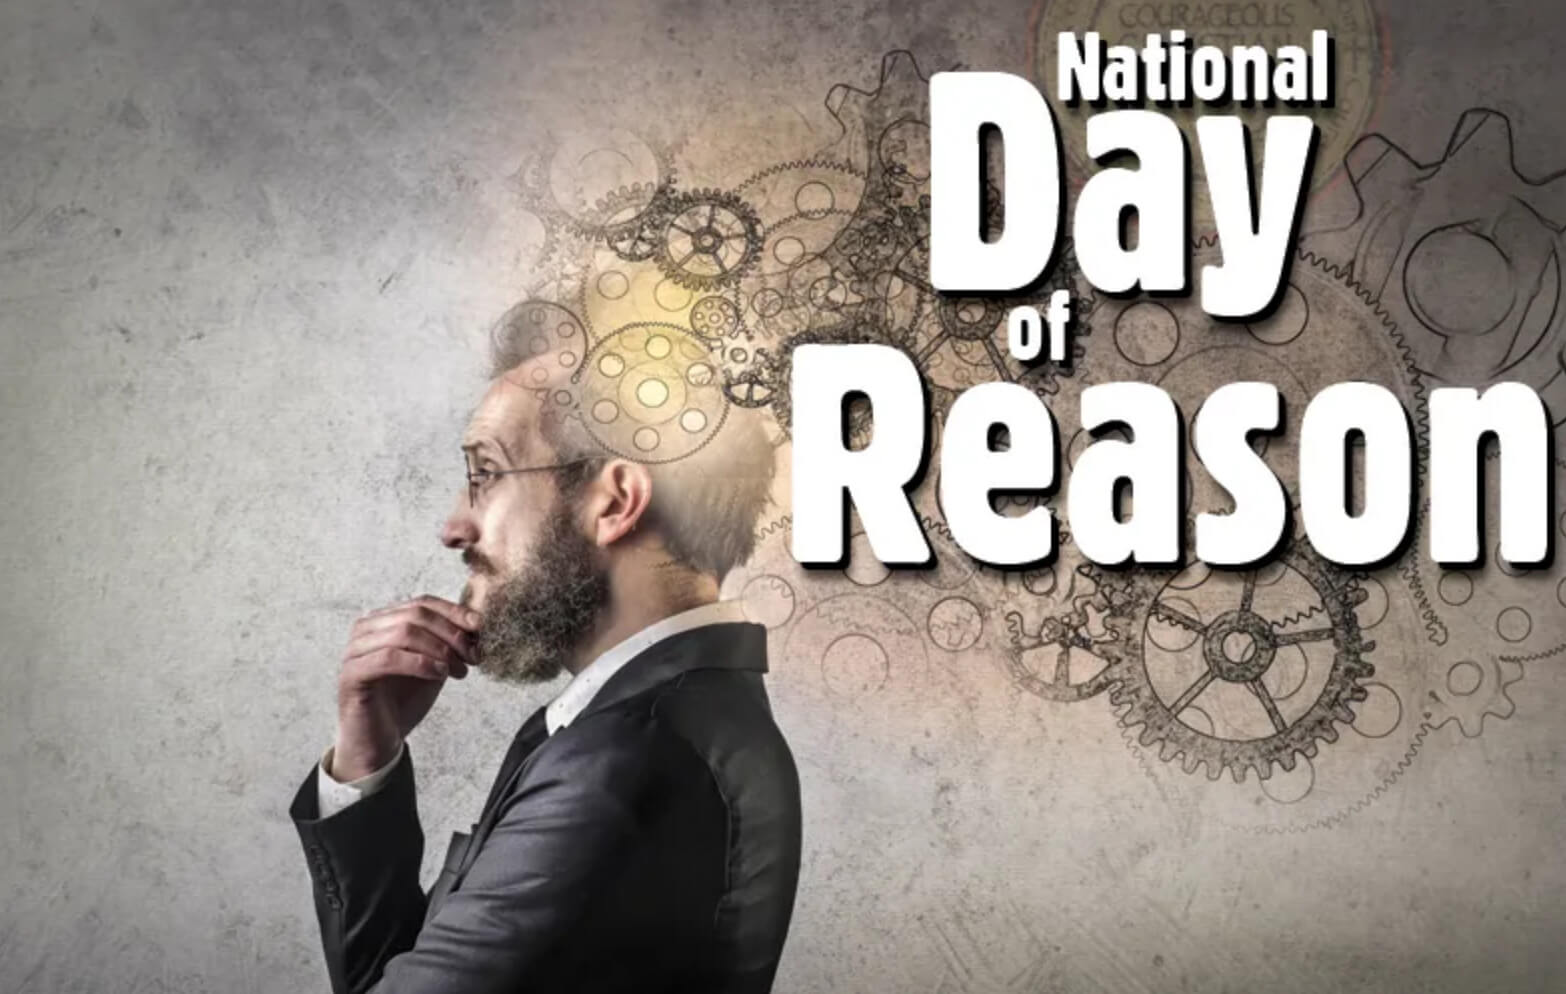 National Day of Reason